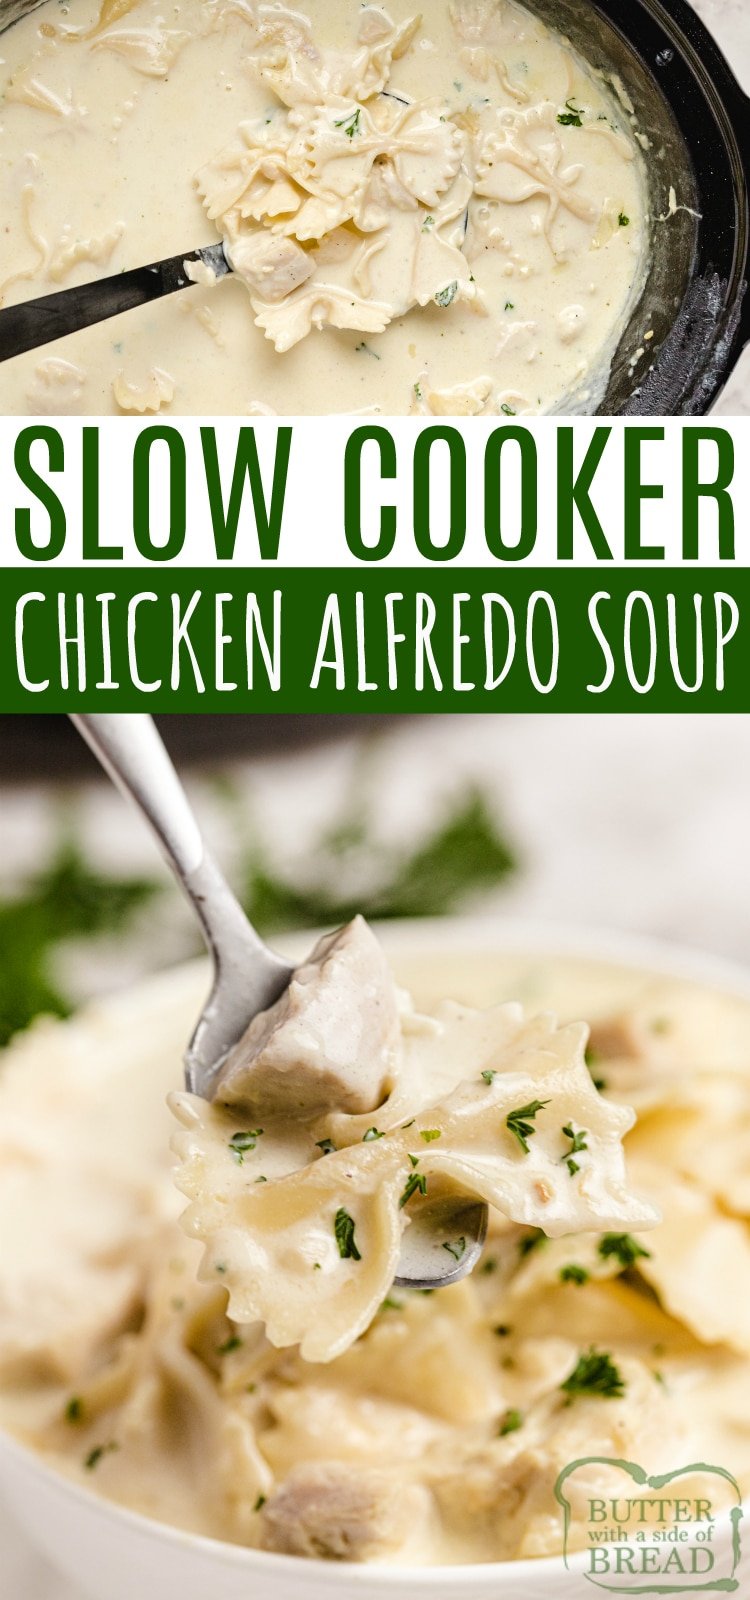 Slow Cooker Chicken Alfredo Soup is smooth, creamy and is made with simple, fresh ingredients. Chicken, milk, cream, garlic and cheese come together to make a soup that tastes just like your favorite alfredo dish...in a delicious soup recipe.